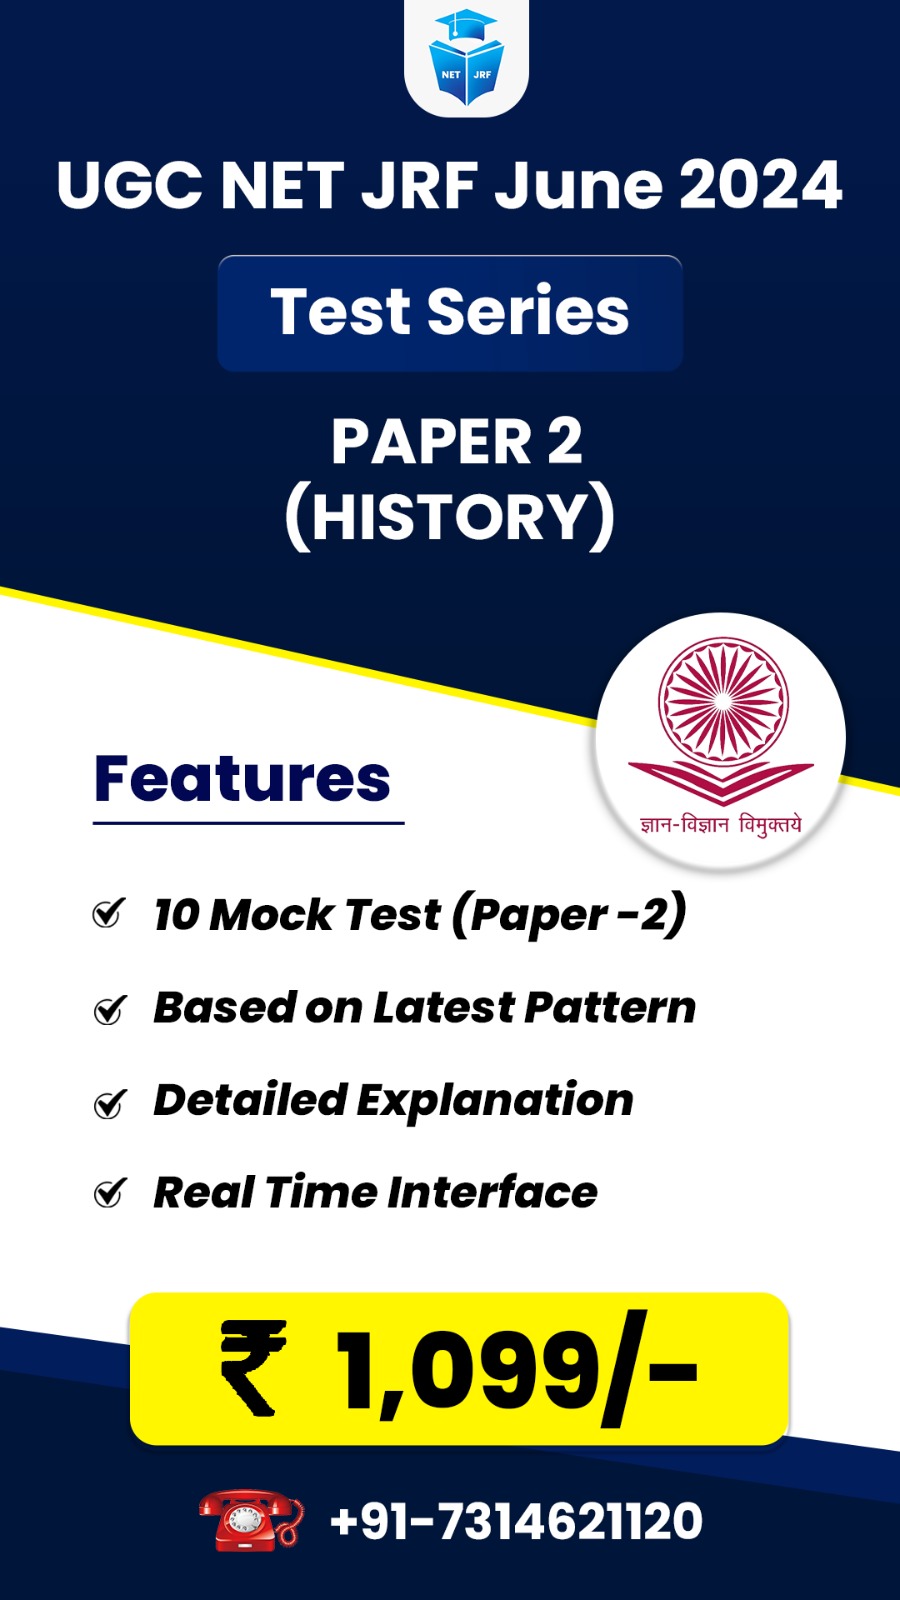 History (Paper 2) Test Series for June 2024